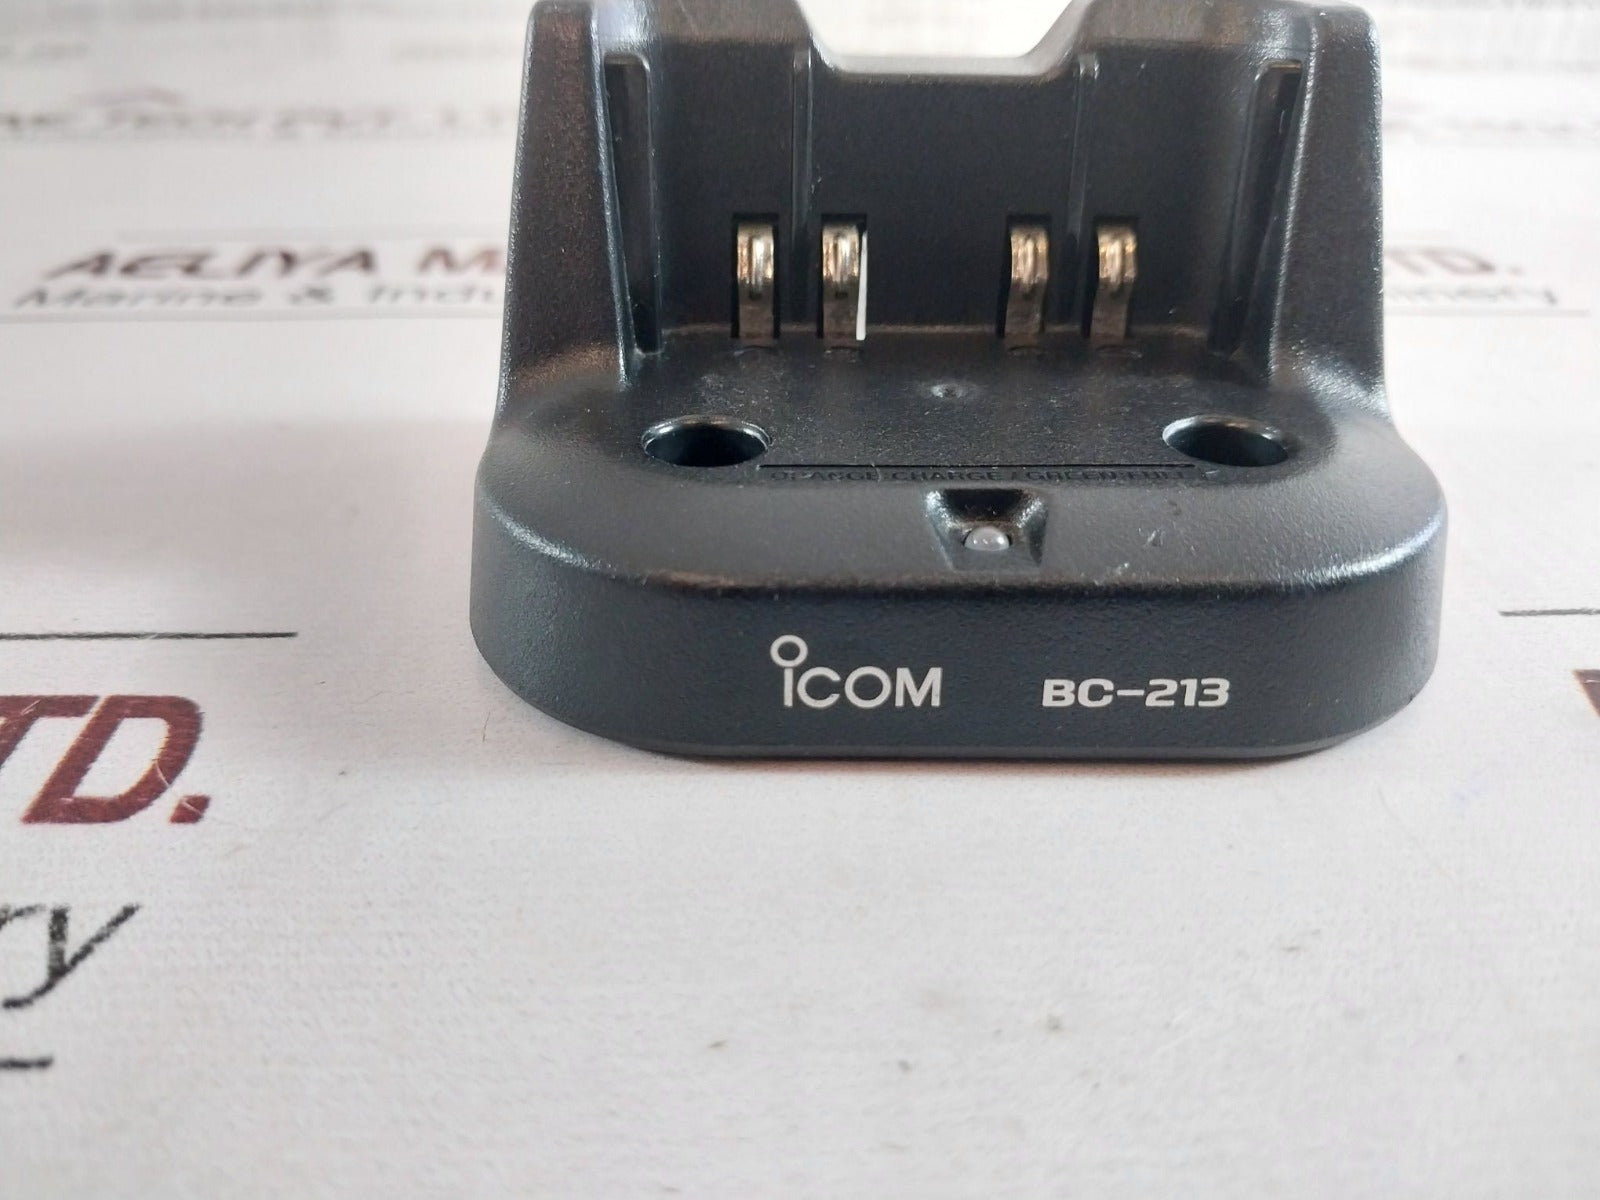 Icom Bc-213 Charger With Bc-242 Adapter